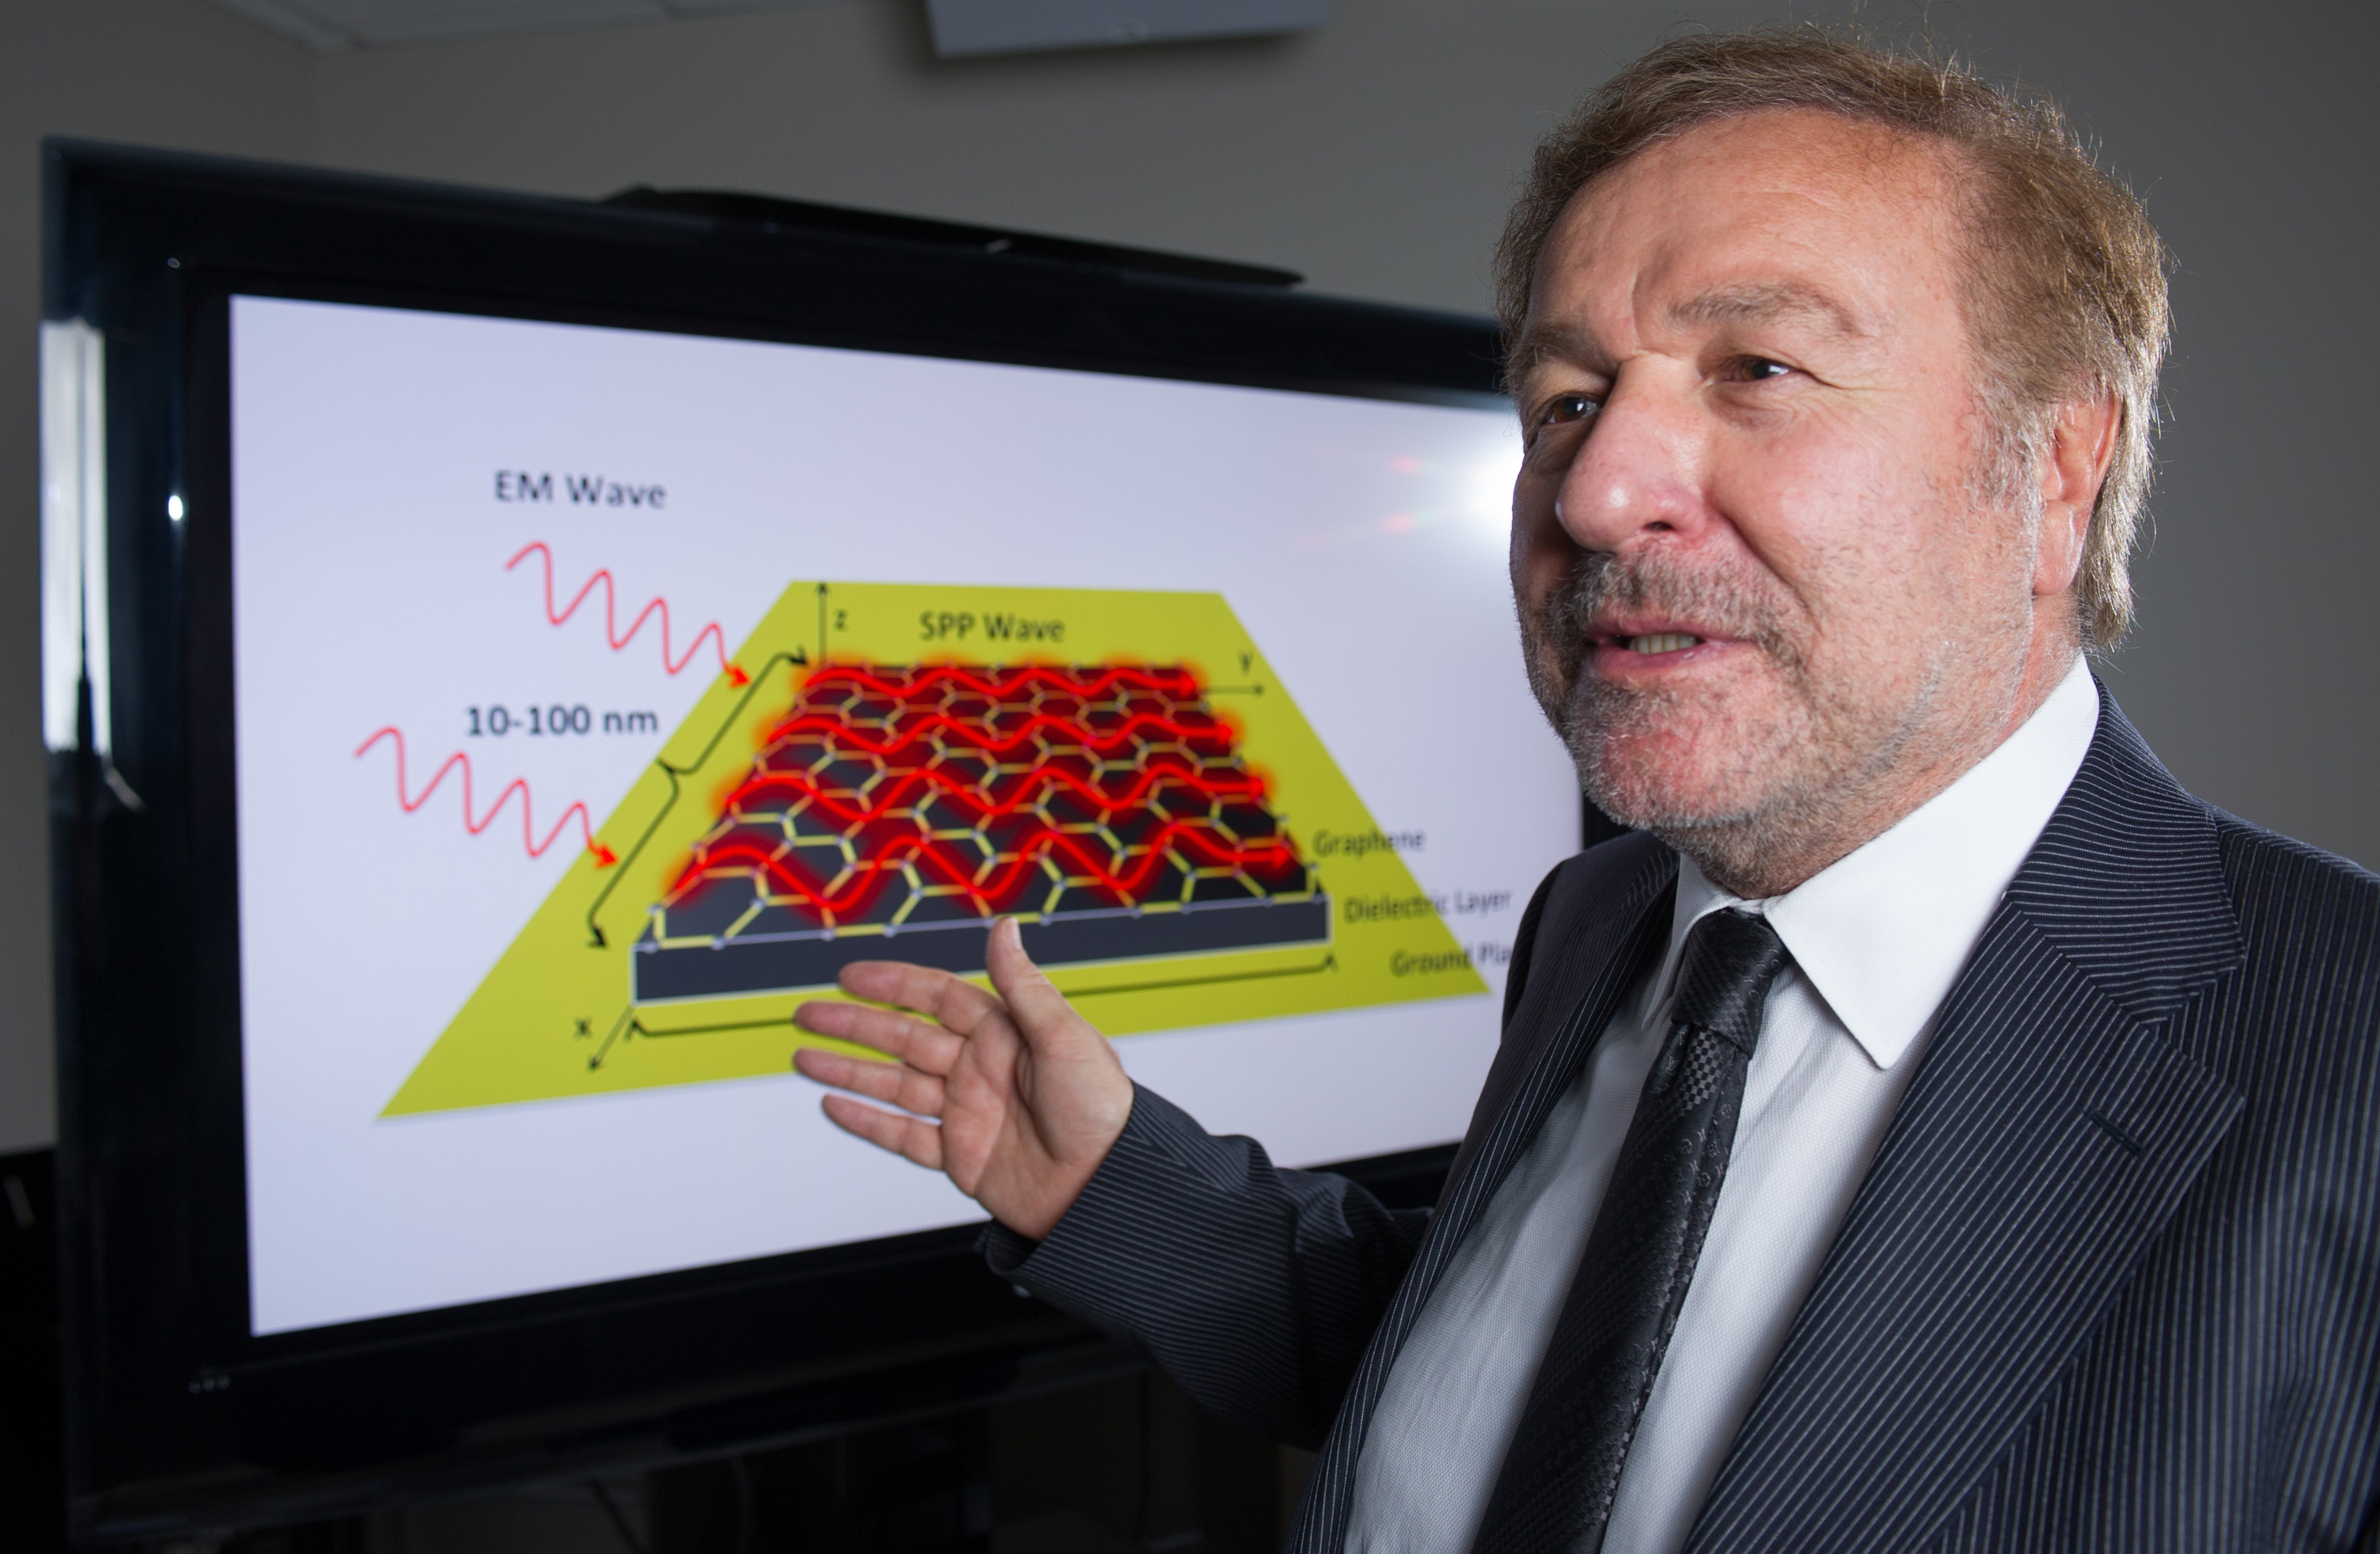 Georgia Tech School of Electrical and Computer Engineering professor Ian Akyildiz poses with a schematic showing how surface plasmon polariton (SPP) waves would be formed on the surface of tiny antennas fabricated from graphene. (Georgia Tech Photo: Rob Felt)